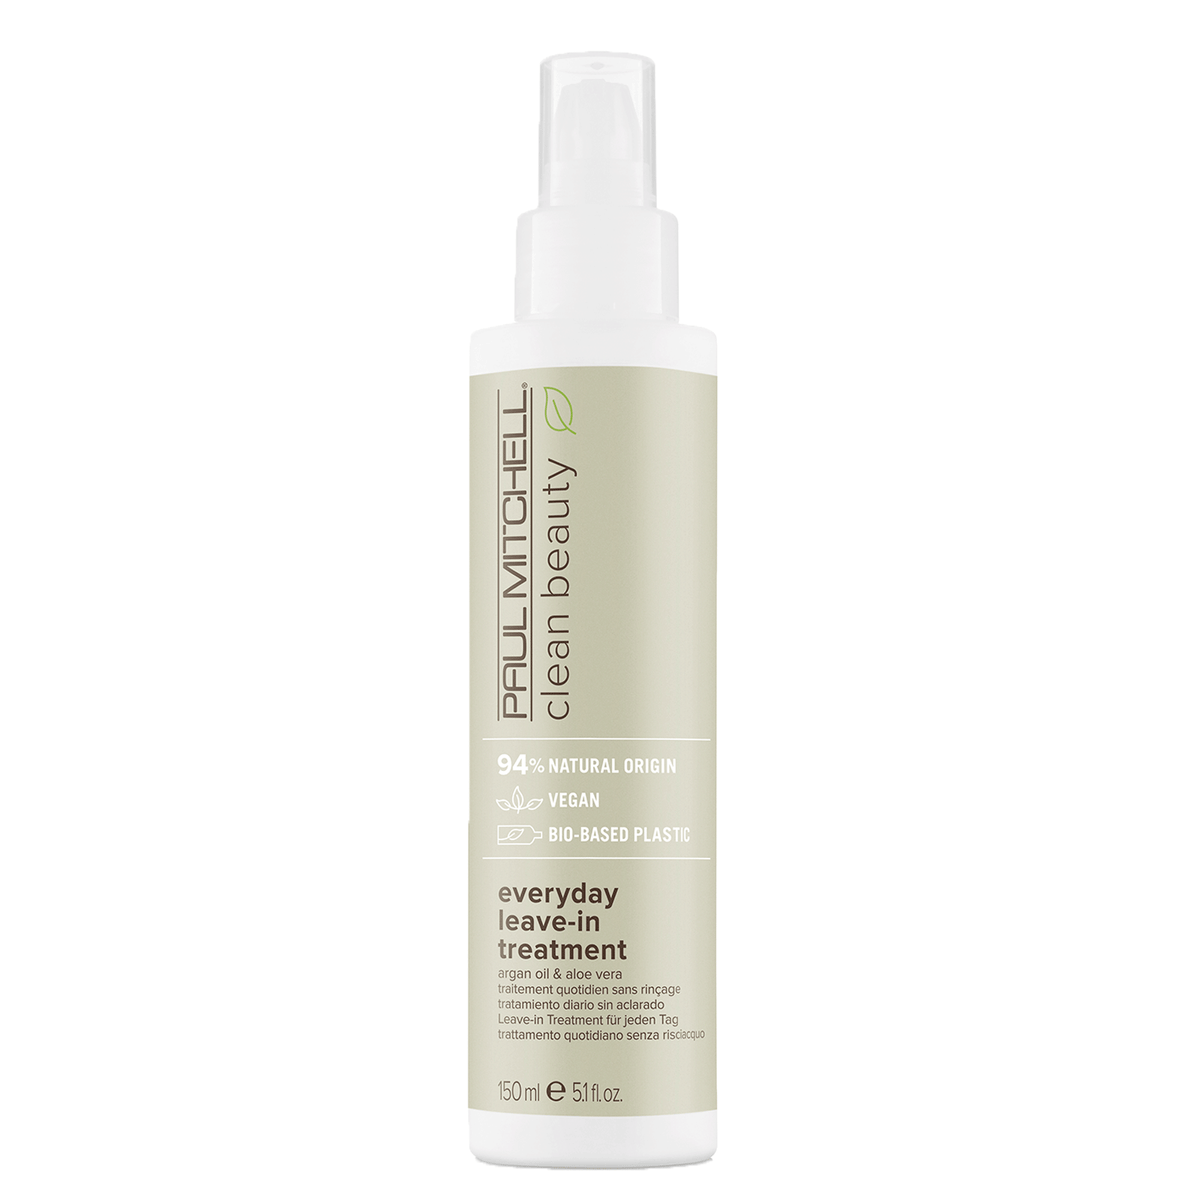 Clean Beauty Everyday Leave-In Treatment - by Paul Mitchell |ProCare Outlet|